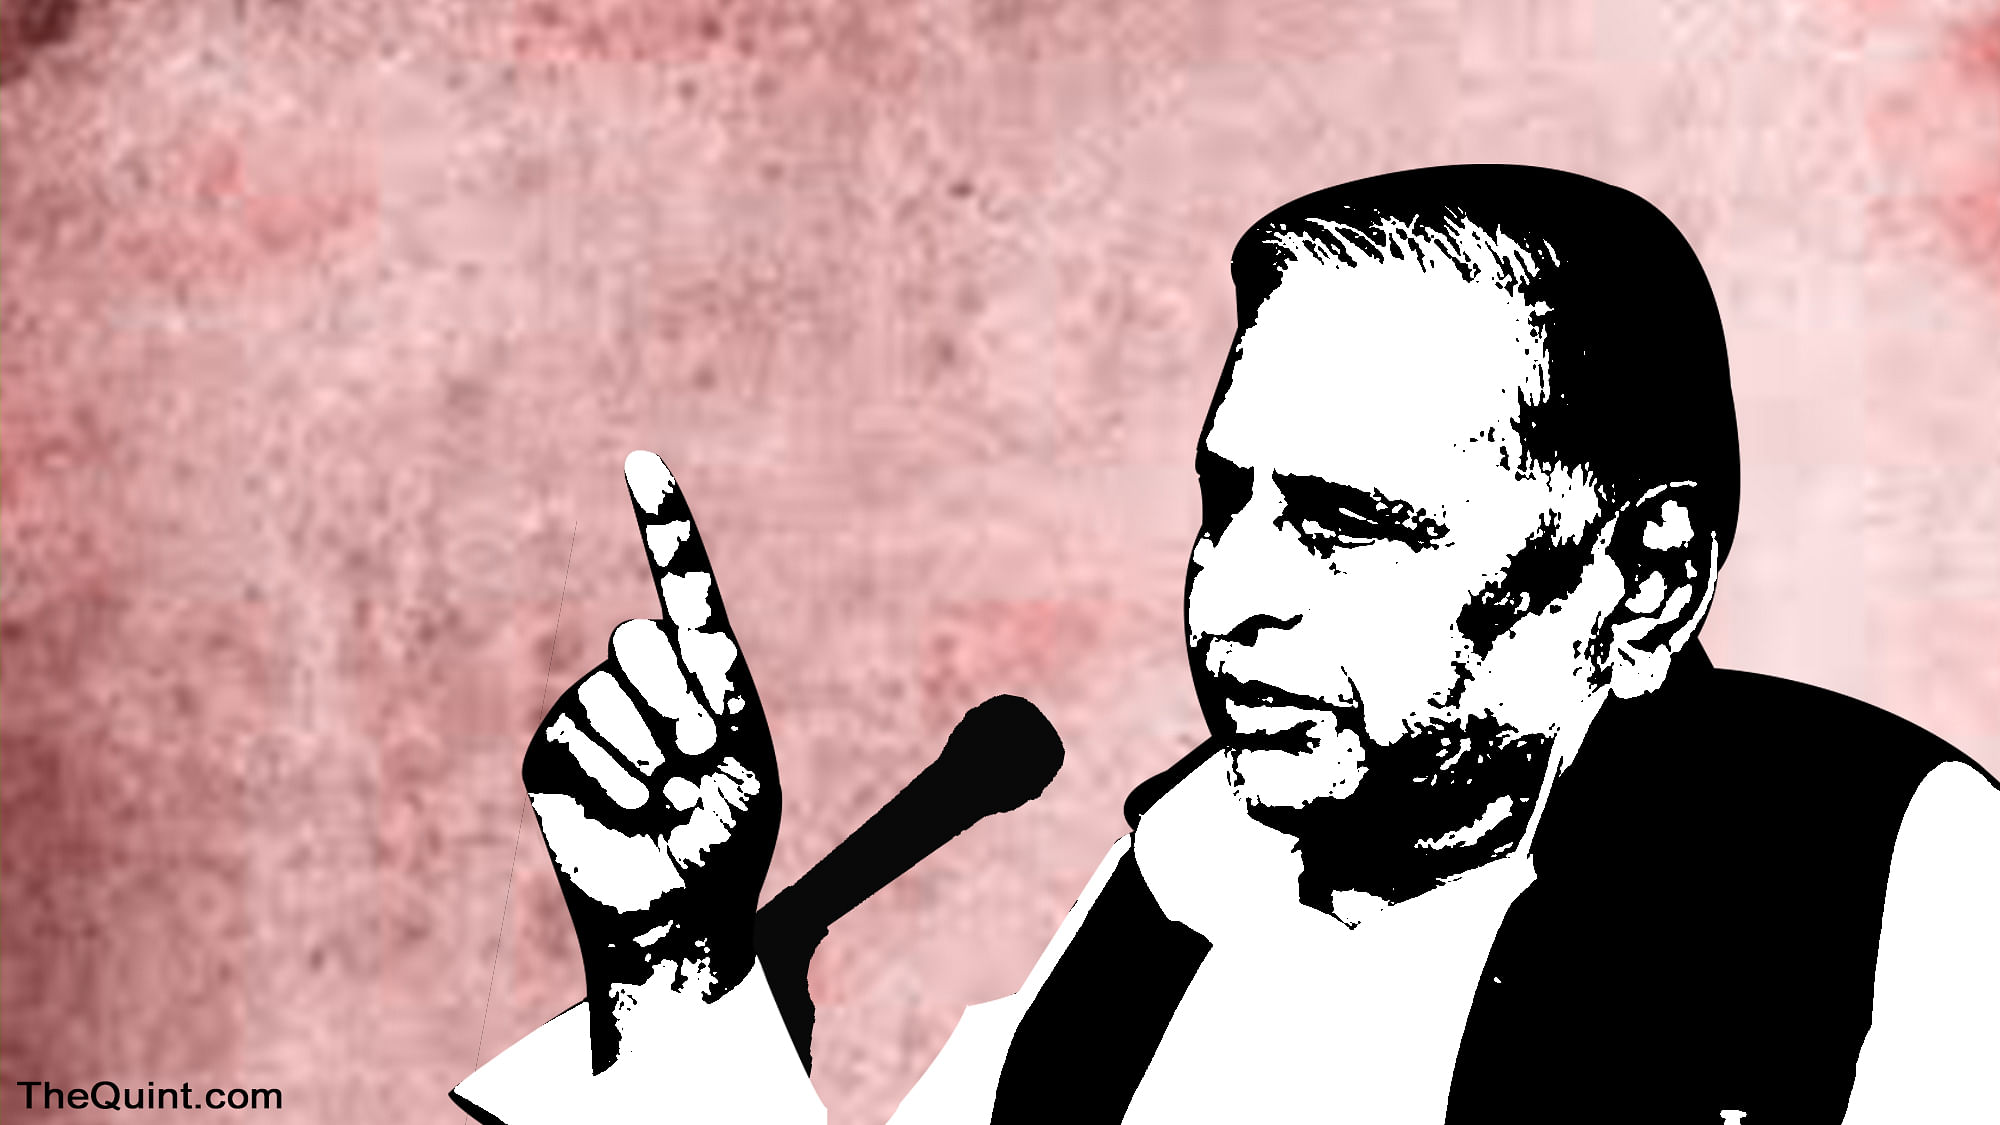 ‘Netaji’ Mulayam Singh finds himself in a rather tough spot as his family feud spills over into politics just as crucial elections draw nearer. (Photo: Rhythum Seth/<b>The Quint</b>)